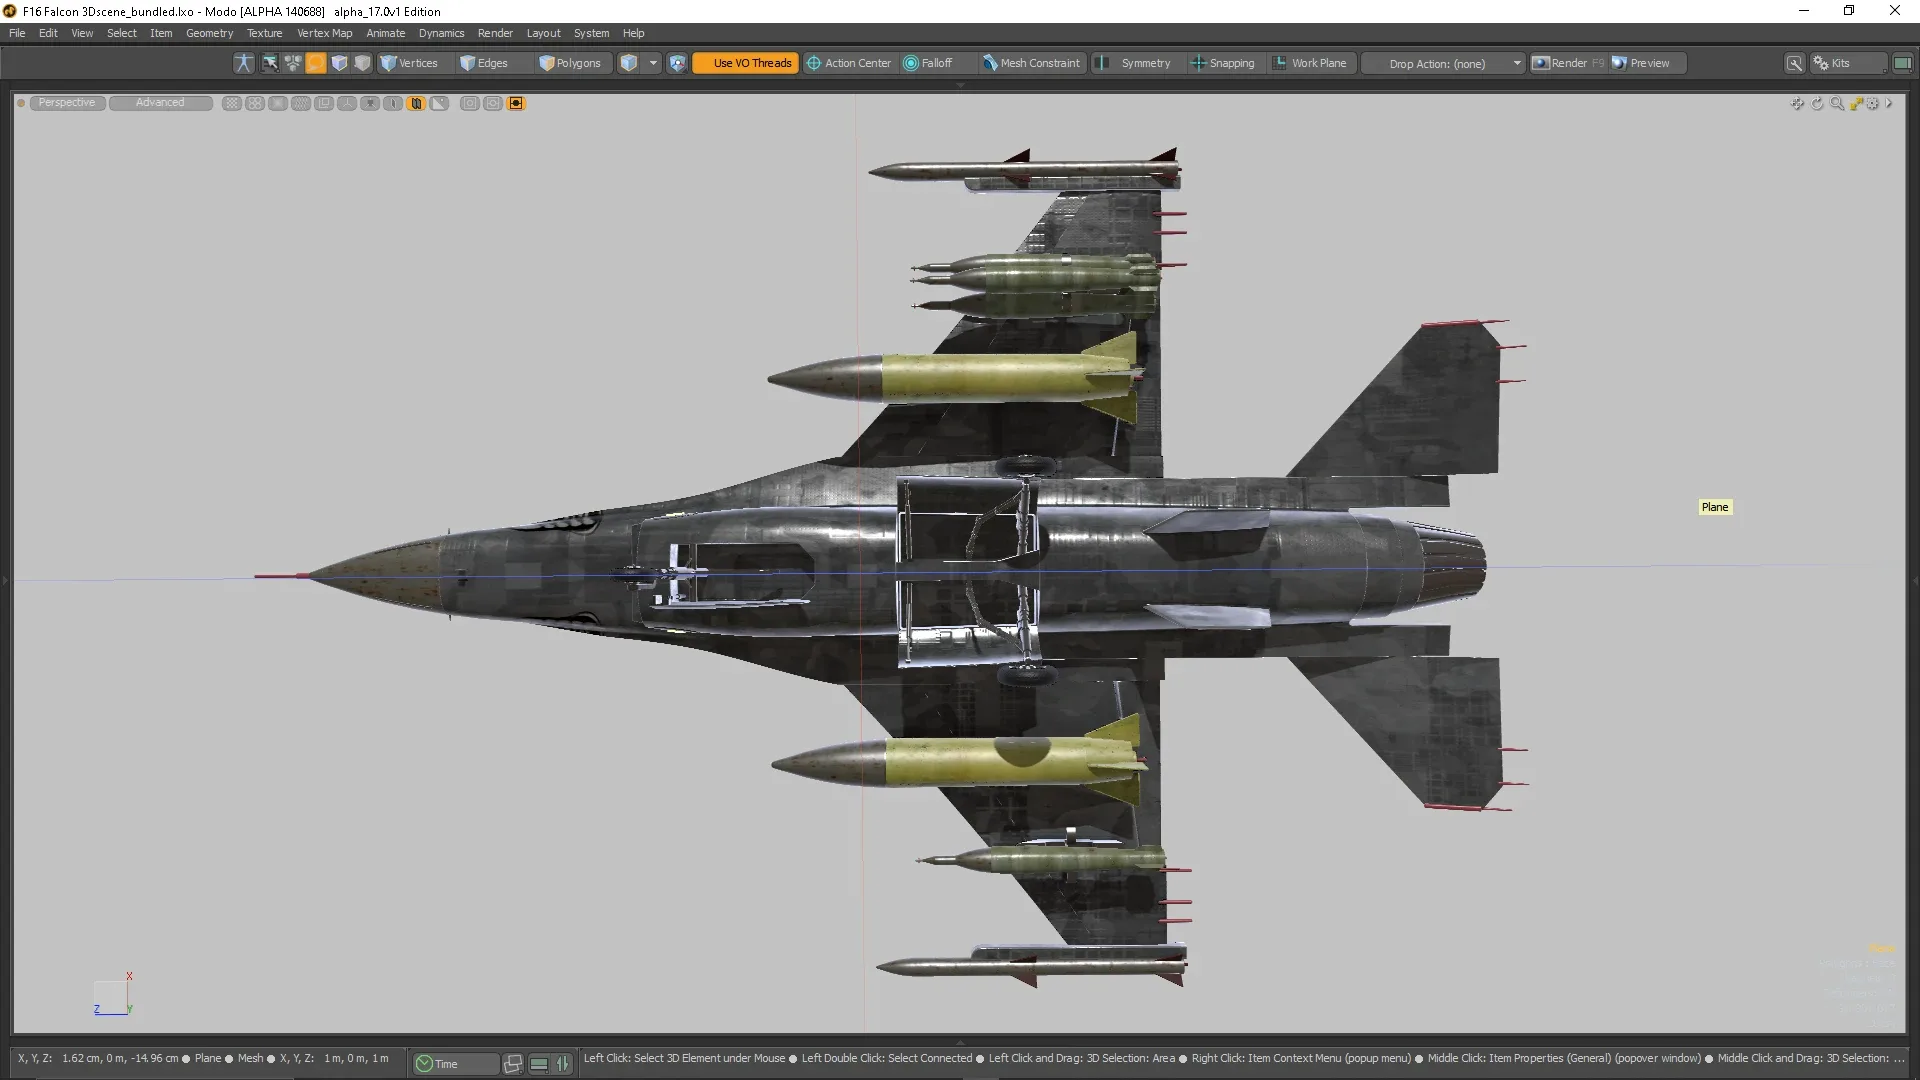 Plasticity 3D tutorial F16 falcon fighter full tutorial, take this!! You've never seen this on Plasticity 3d, you won't regret it!!!